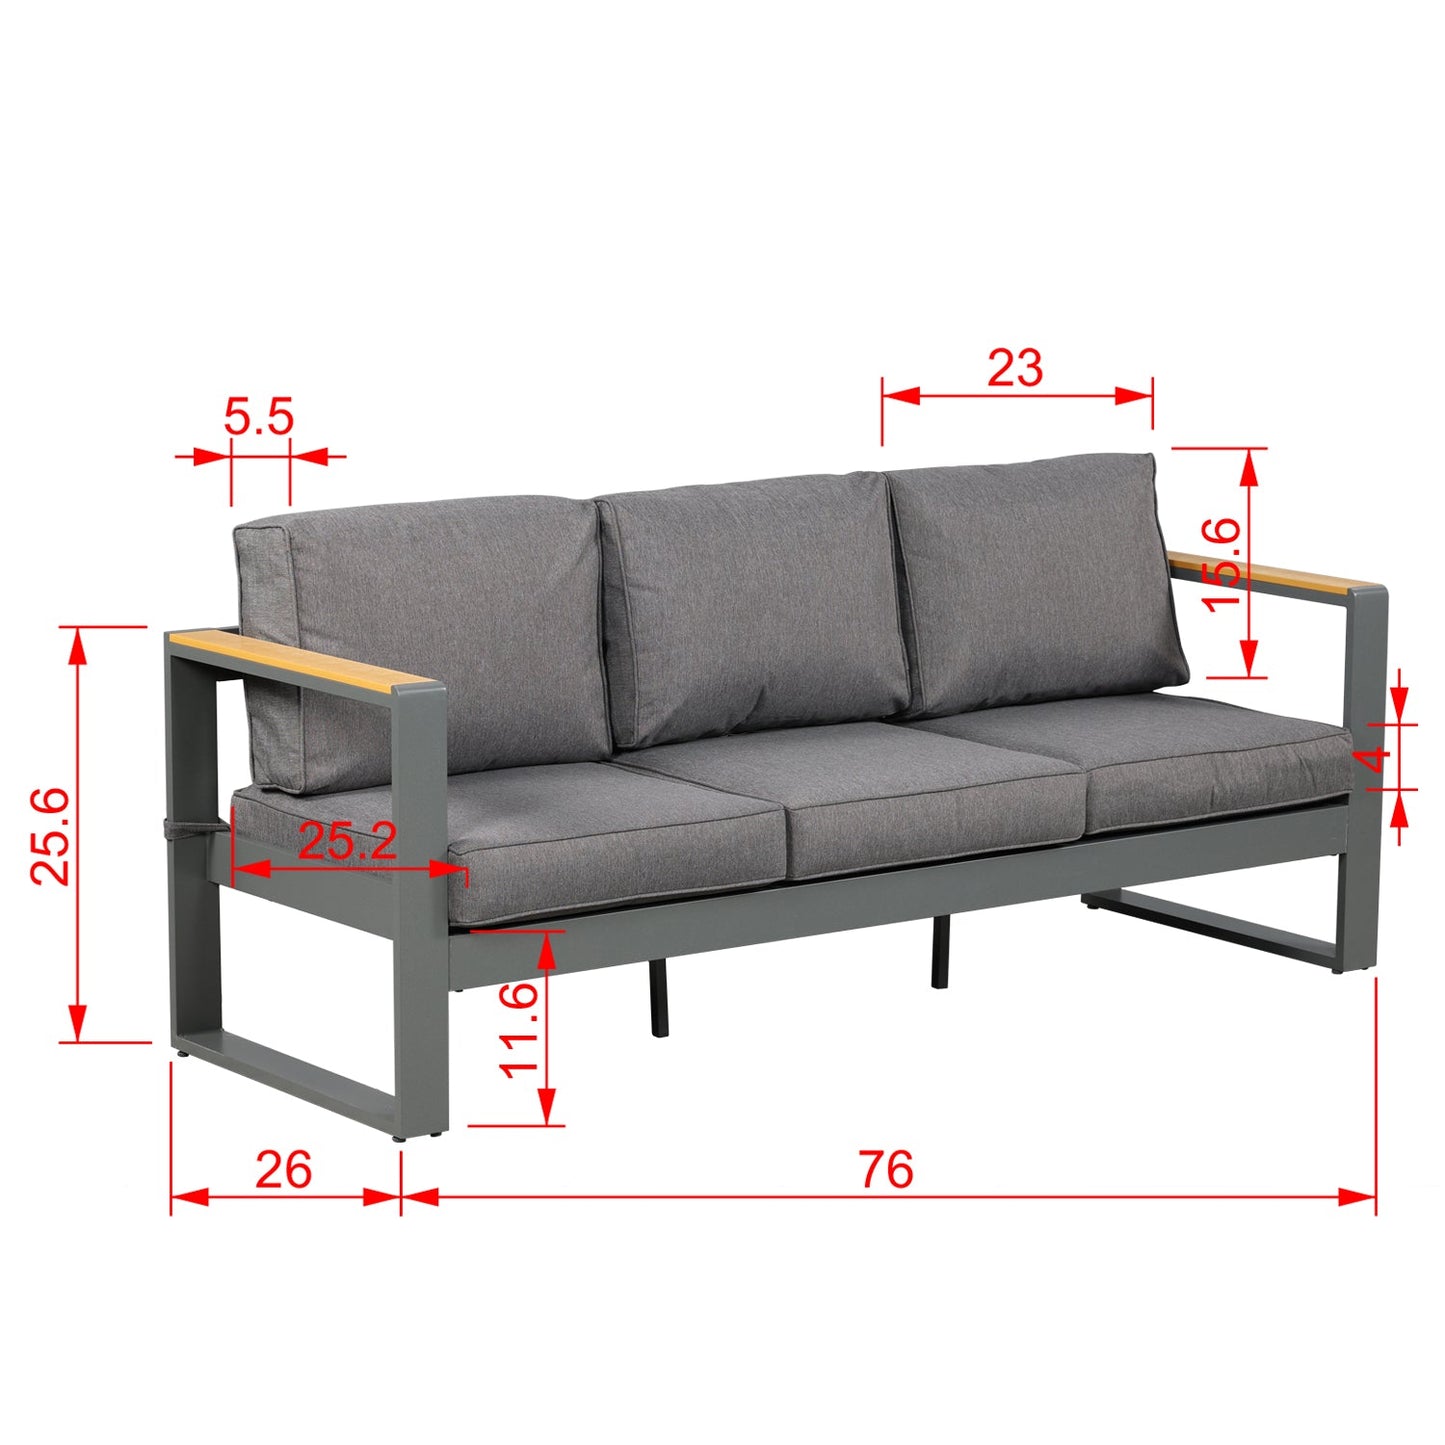 3 Seater Aluminum Sofa Couch Deep Seat - All-Weather Resistant Outdoor Conversation Set with Thick Cushions Furniture Aoodor LLC   